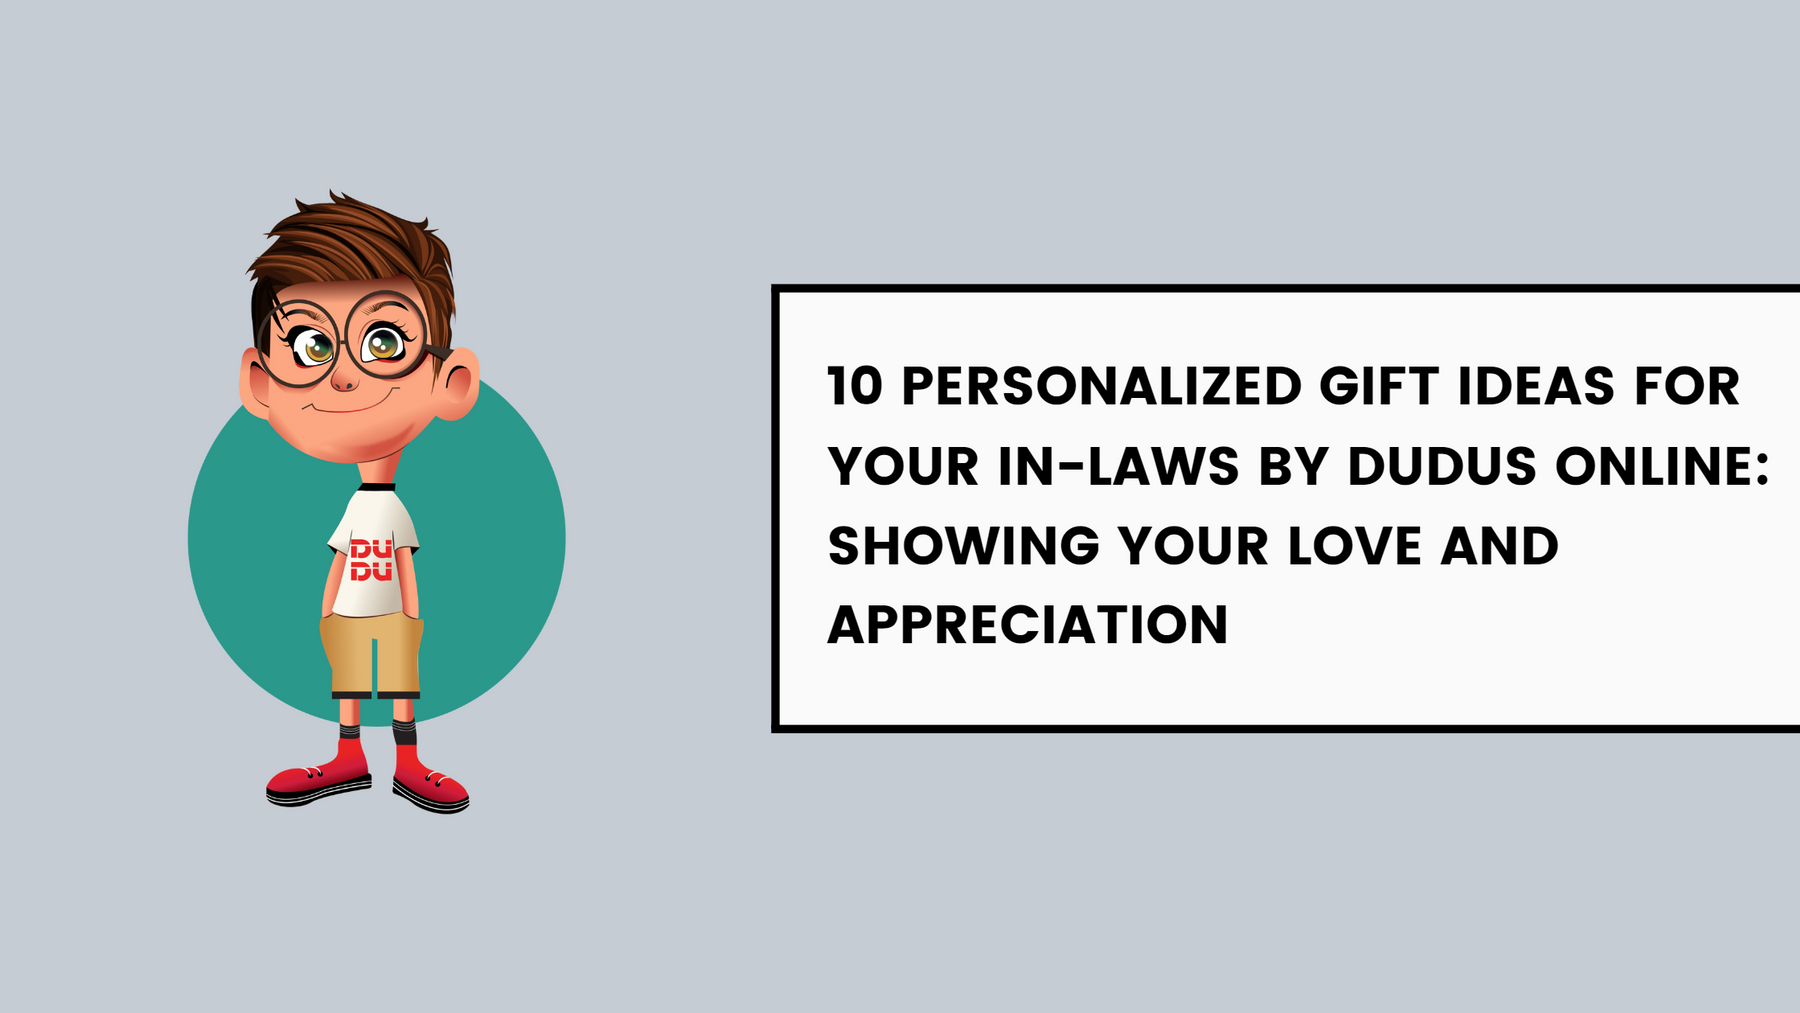 10 Personalized Gift Ideas For Your In-Laws By Dudus Online: Showing Your Love And Appreciation